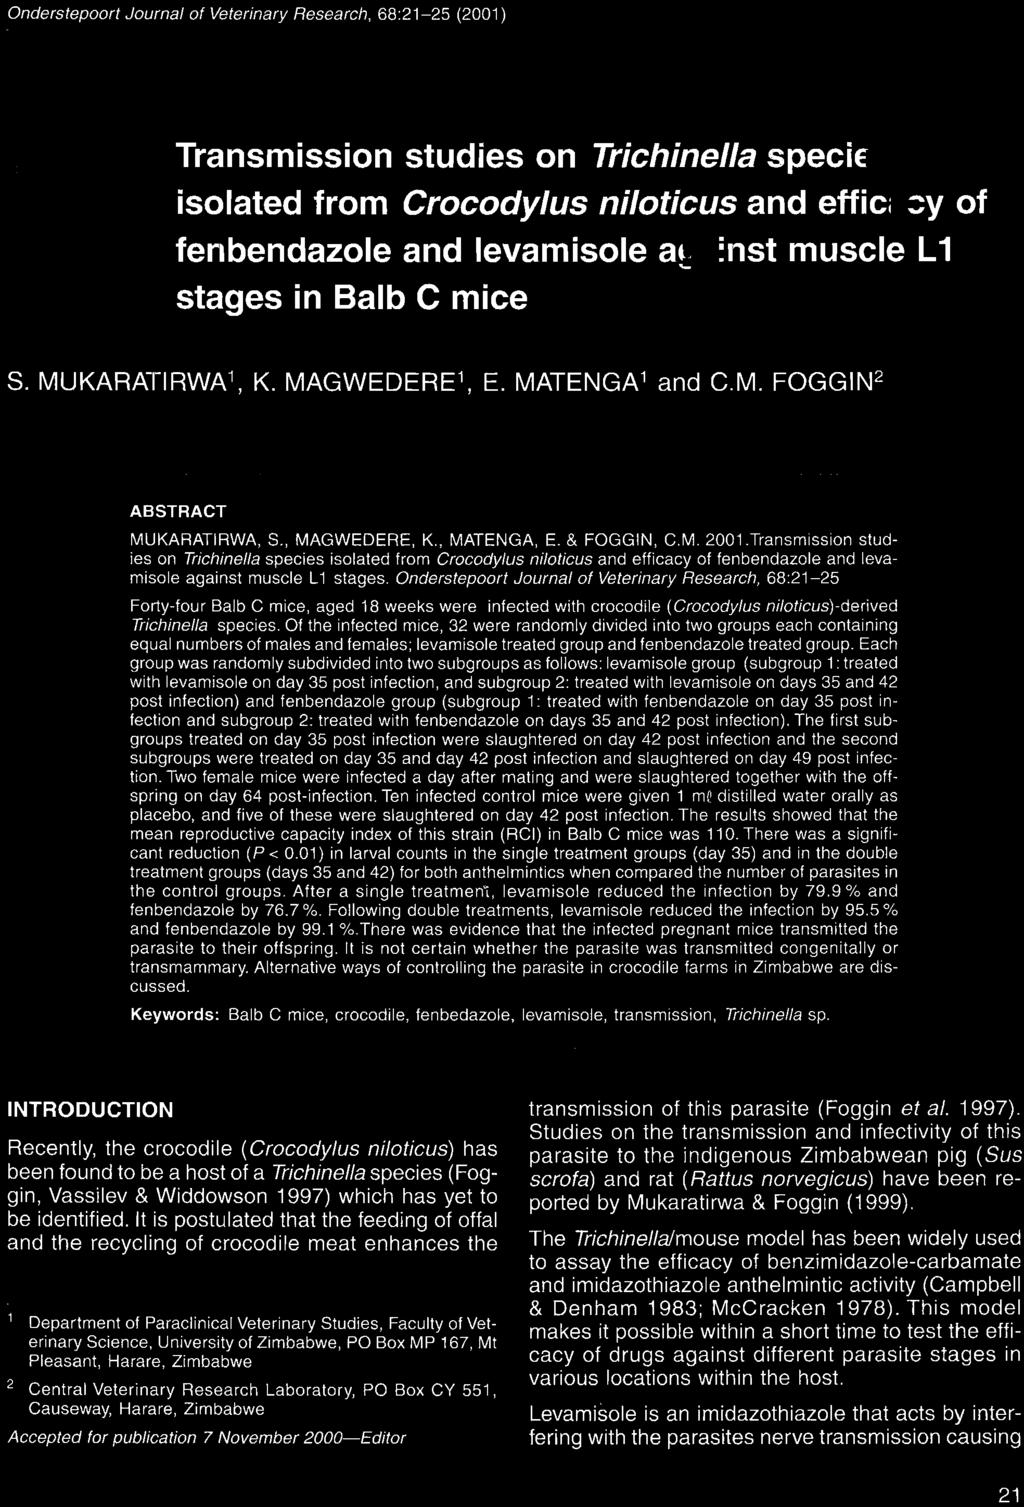 Transmission studies on Trichinella species isolated from Crocodylus niloticus and efficacy of fenbendazole and levamisole against muscle L 1 stages.